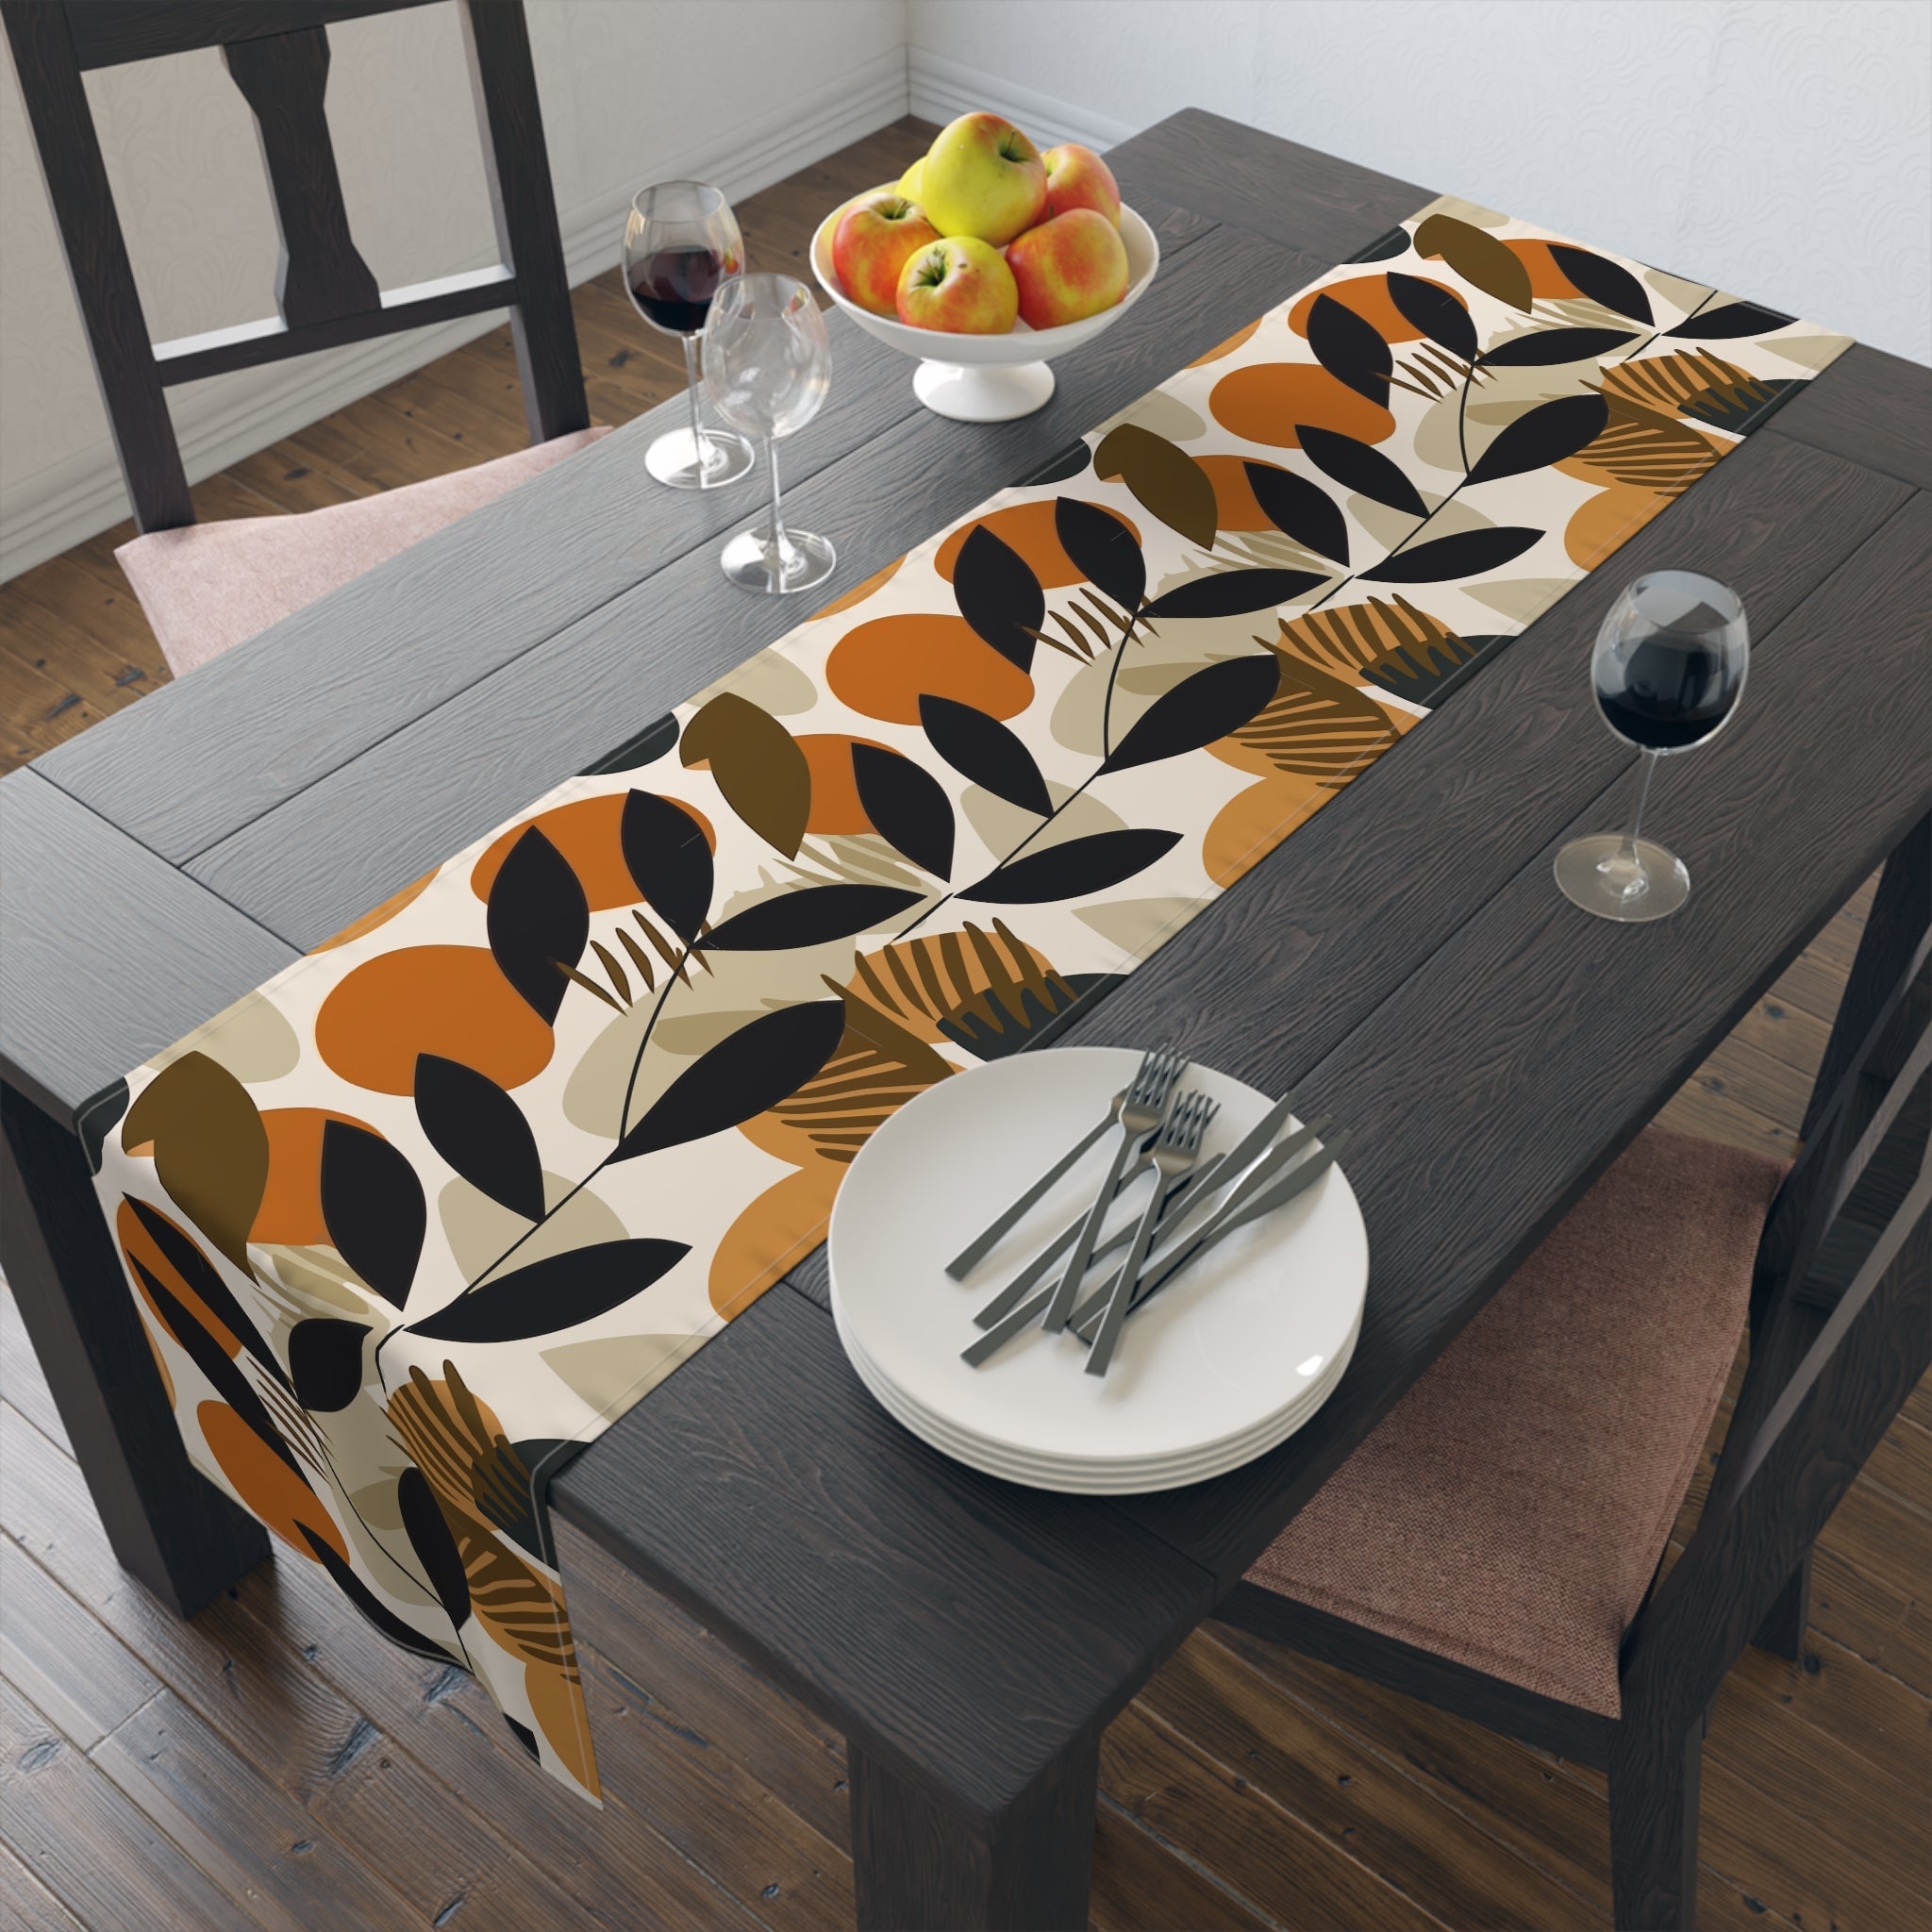 Leafy Harmony: The Earthy Table Runner - My Store